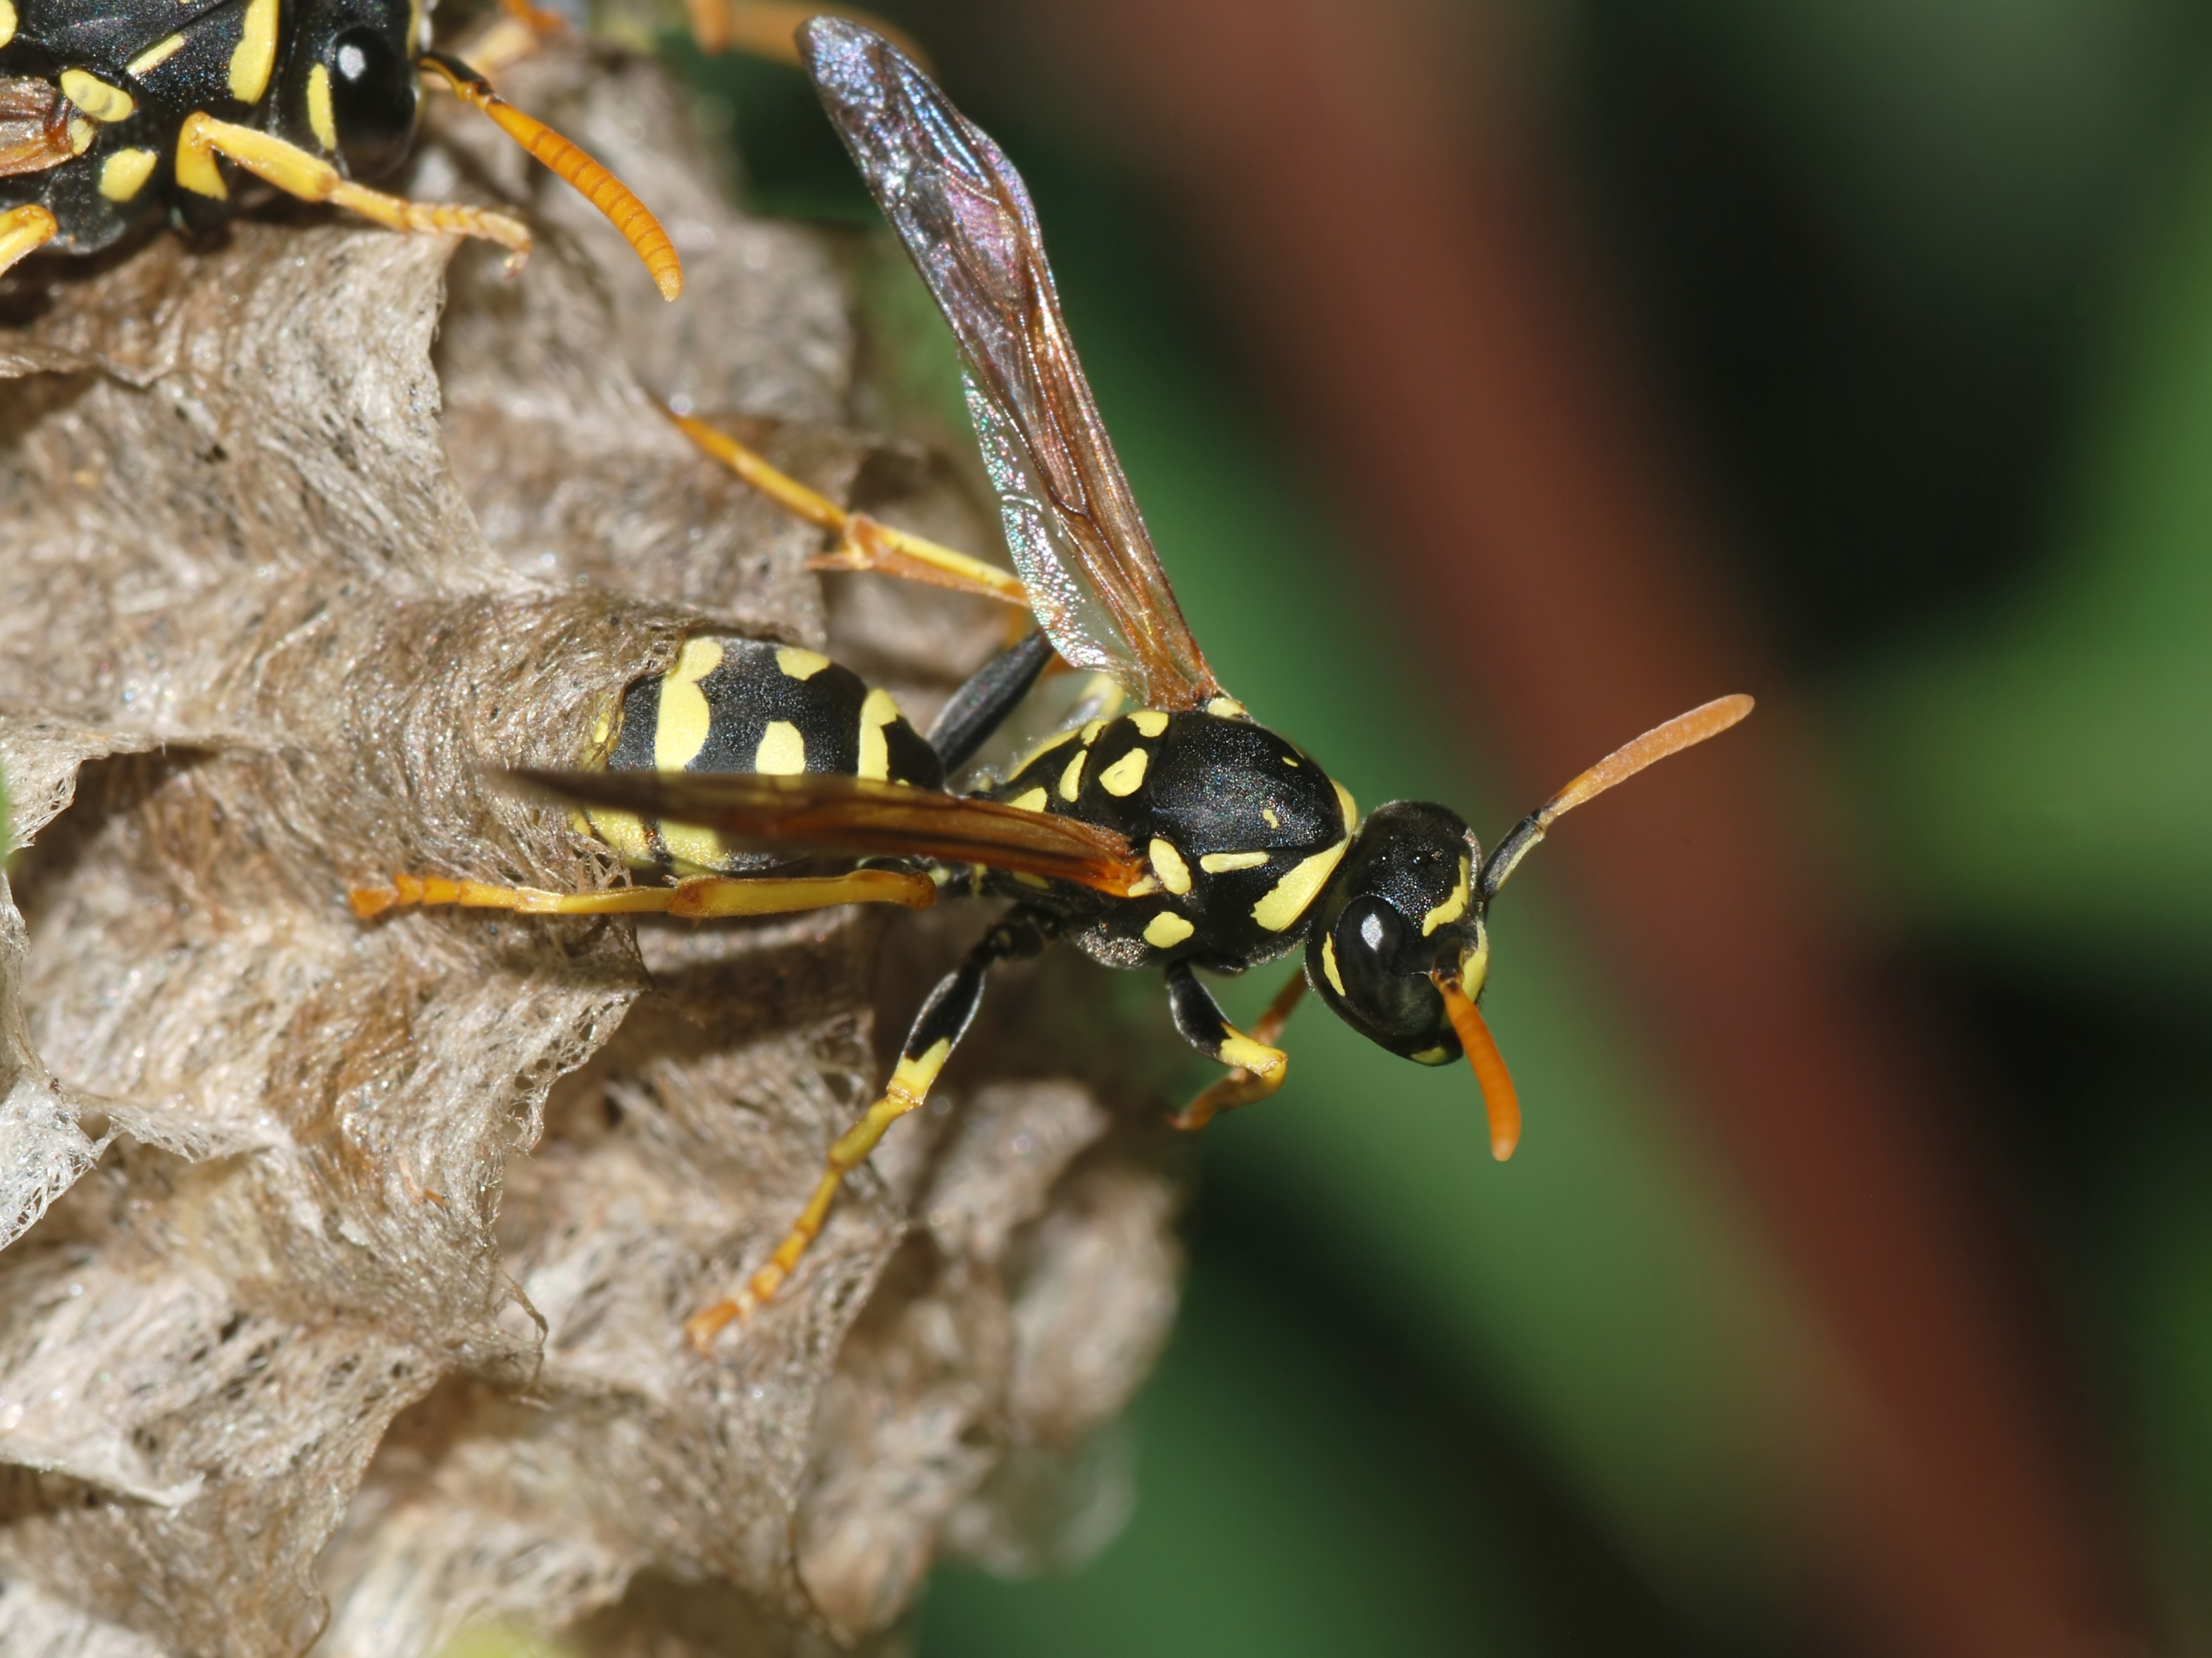 Wasp - Spirit Animal Totems and Messages